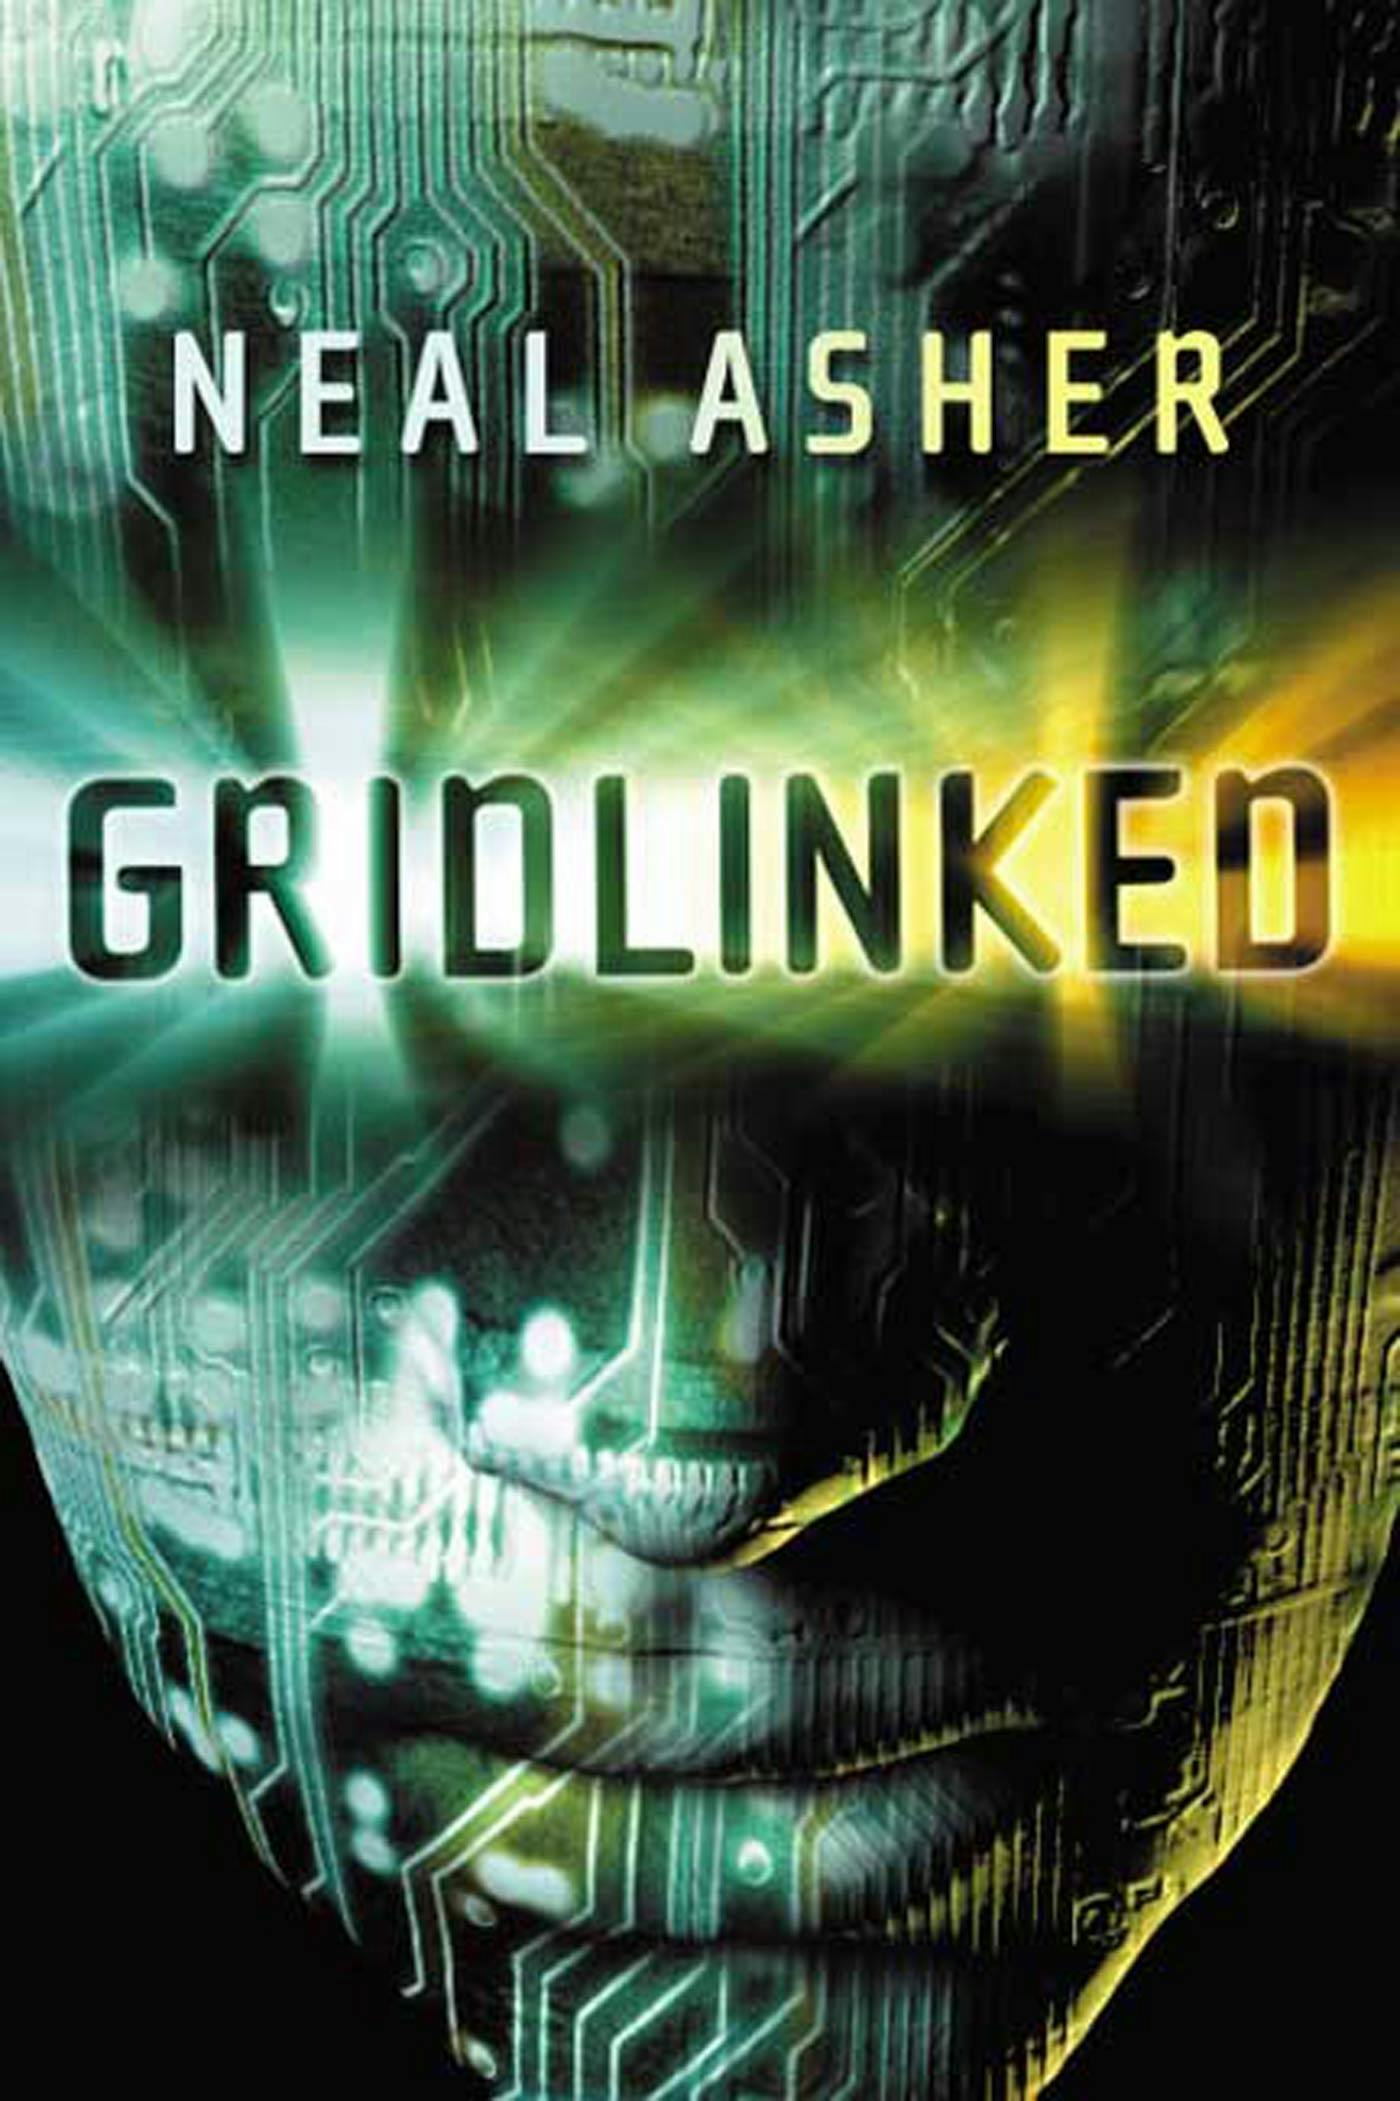 Cover for the book titled as: Gridlinked